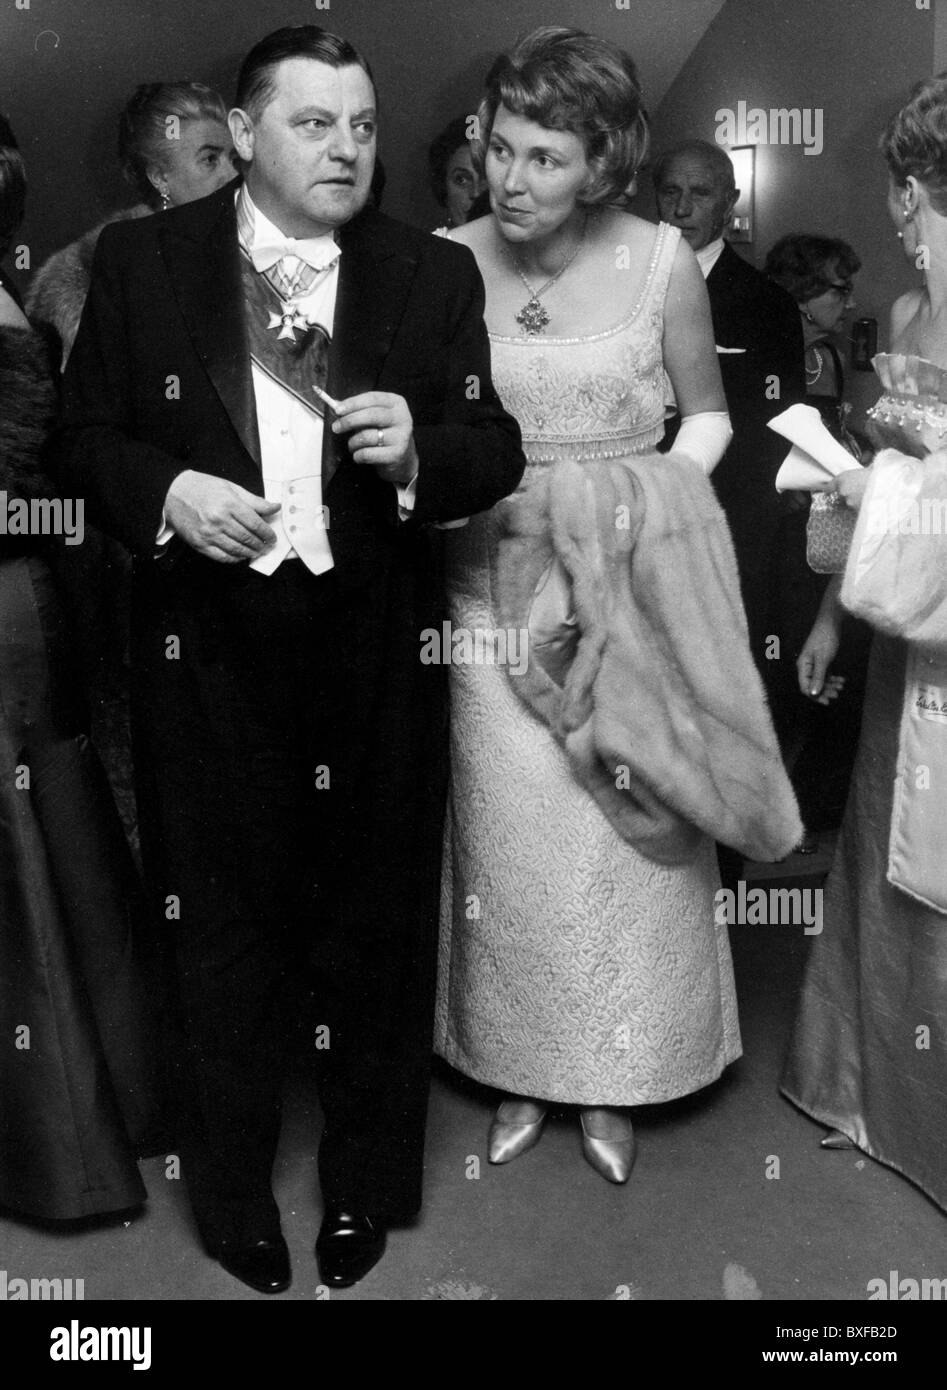 Strauss, Franz Josef, 6.9.1915 - 3.10.1988, German politician, with wife Marianne at the receiption for Queen Elizabeth II of Great Britian, Bavarian National Theatre, Munich, 21.5.1965, , Stock Photo